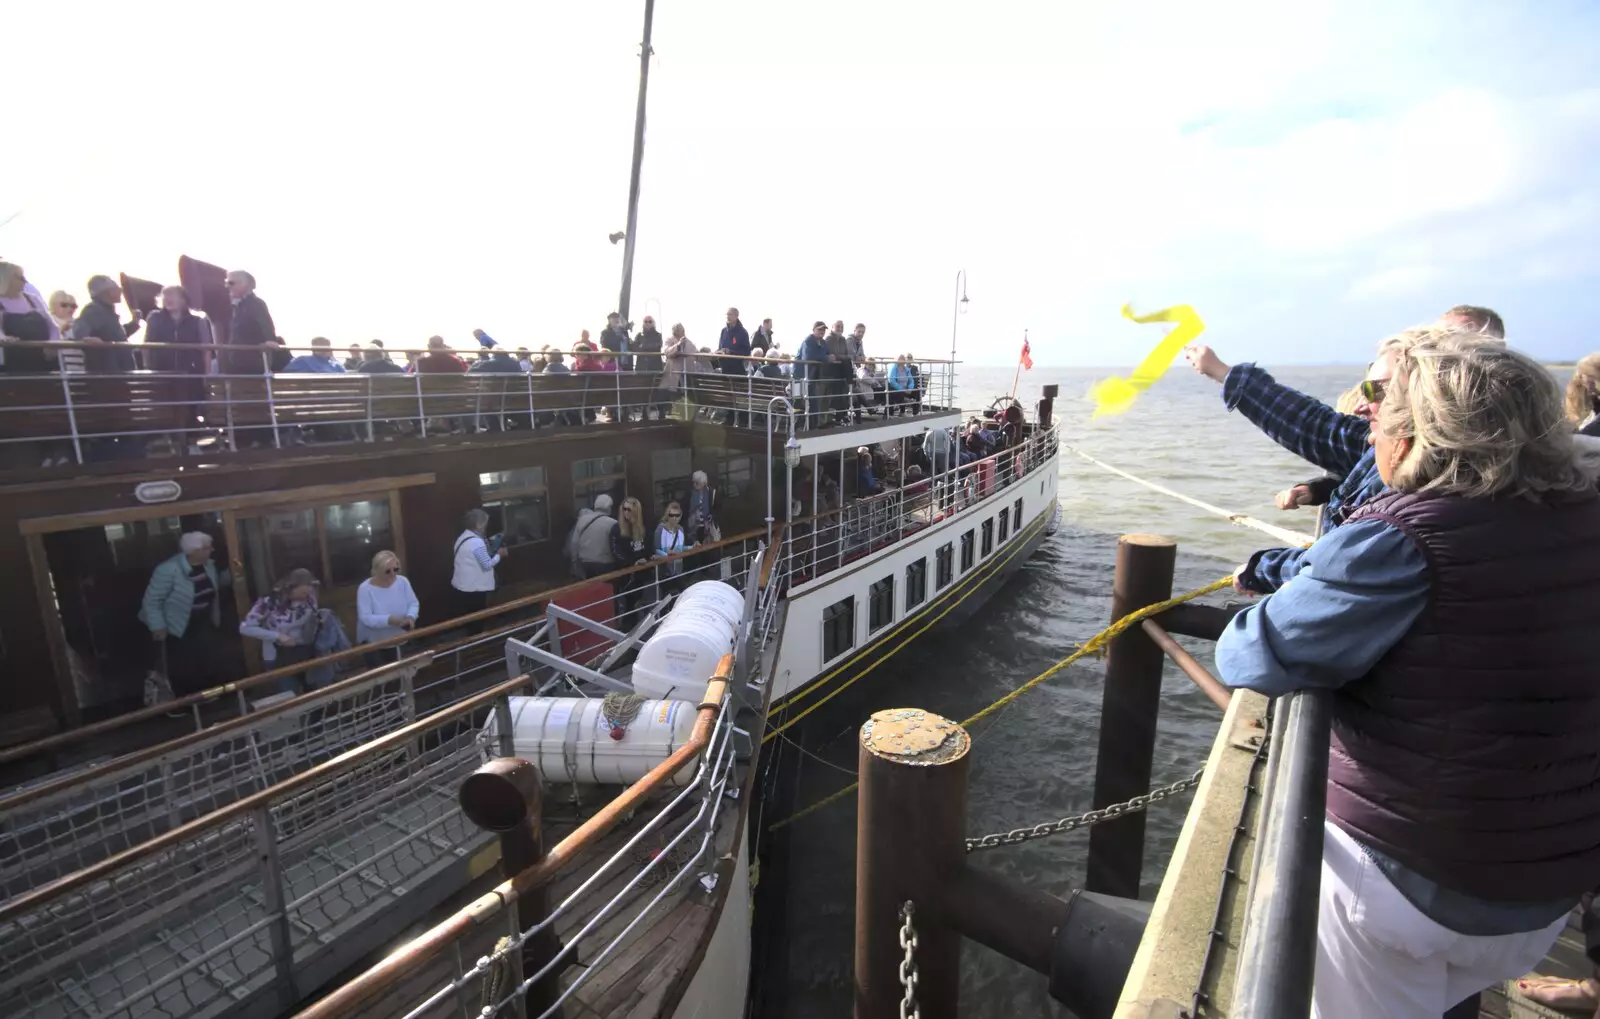 Someone waves a yellow streamer, from The Waverley Paddle Steamer at Southwold Pier, Suffolk - 27th September 2023